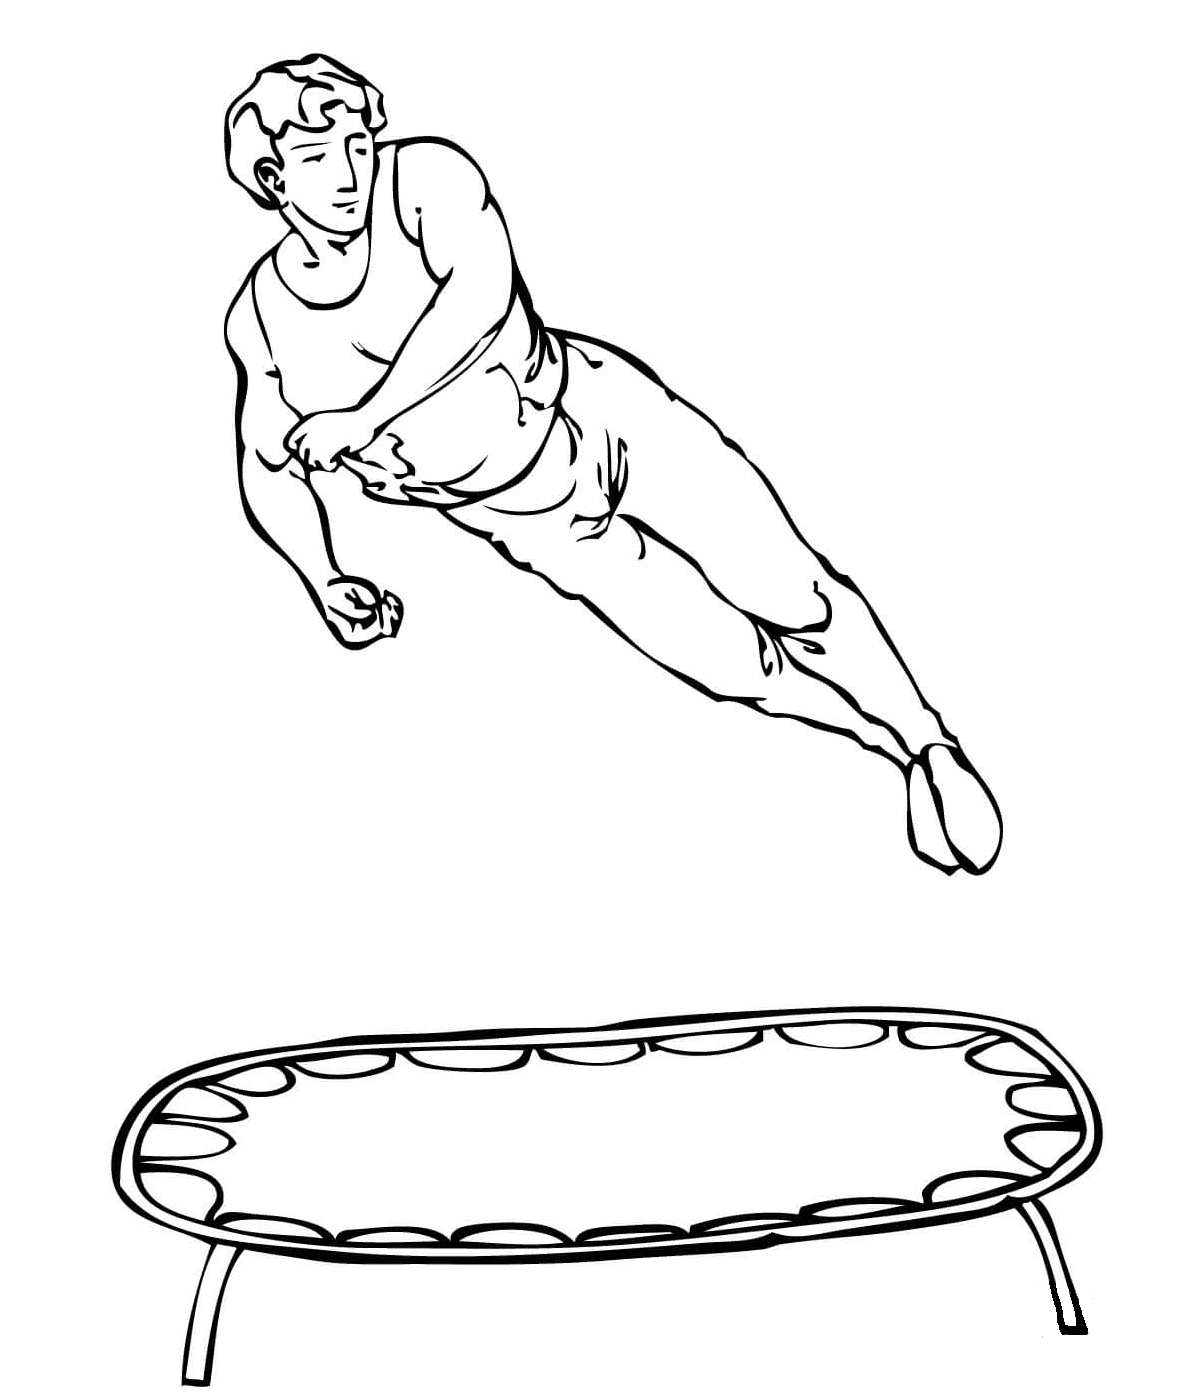 Athlete on Trampoline Coloring Page